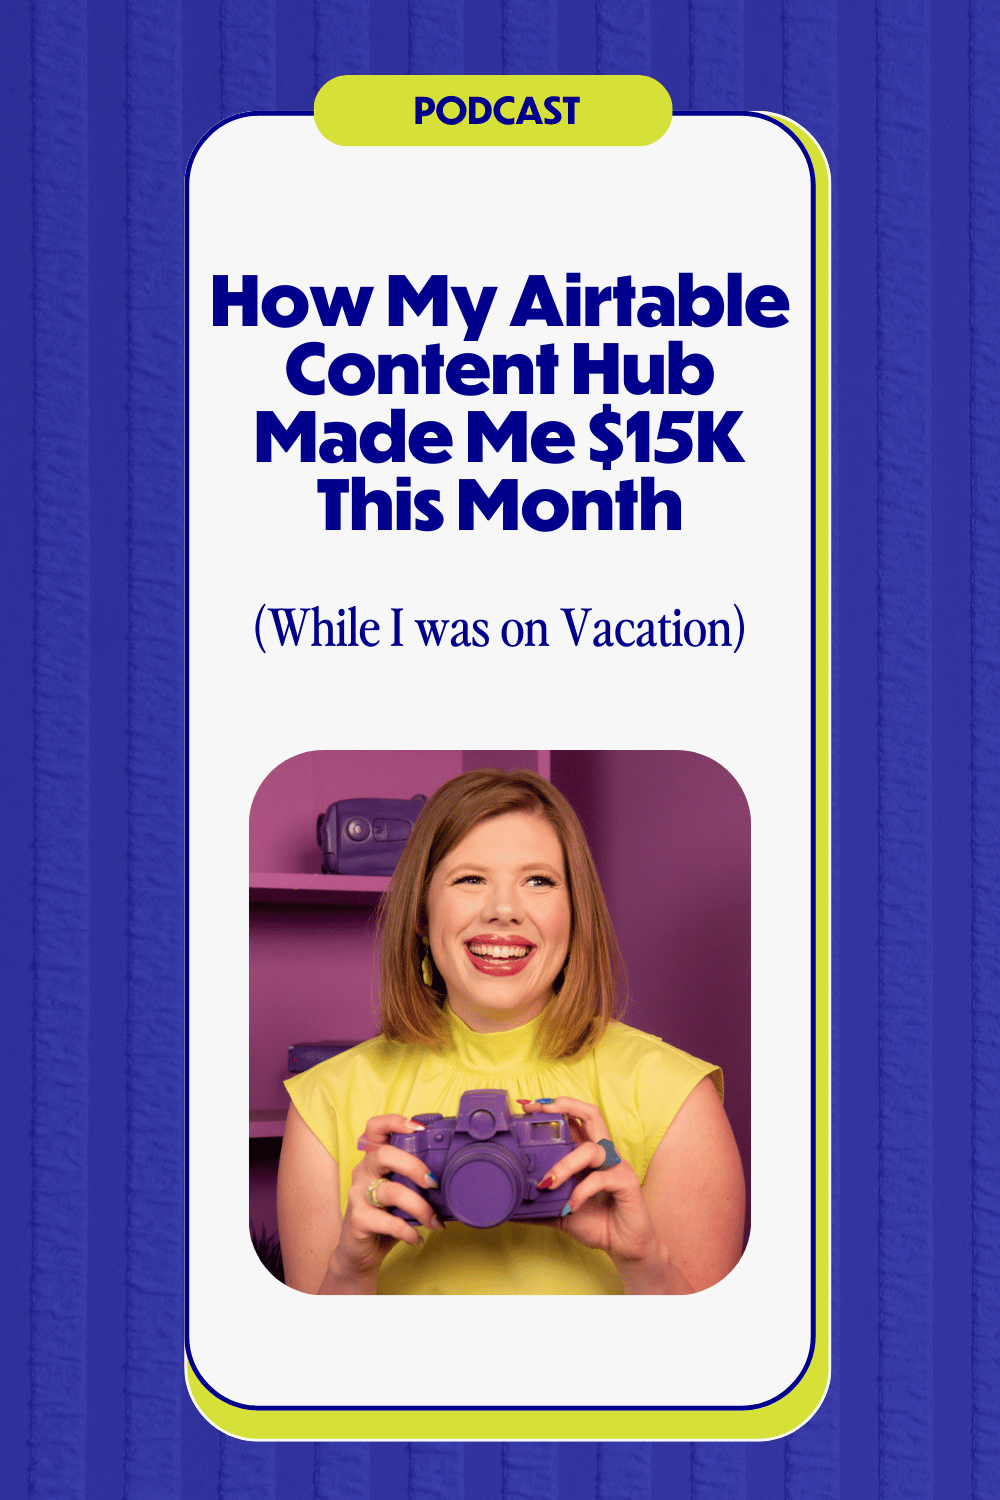 Ashley Rose smiling and holding a purple camera, featured in "How My Airtable Content Hub Made Me $15K This Month"